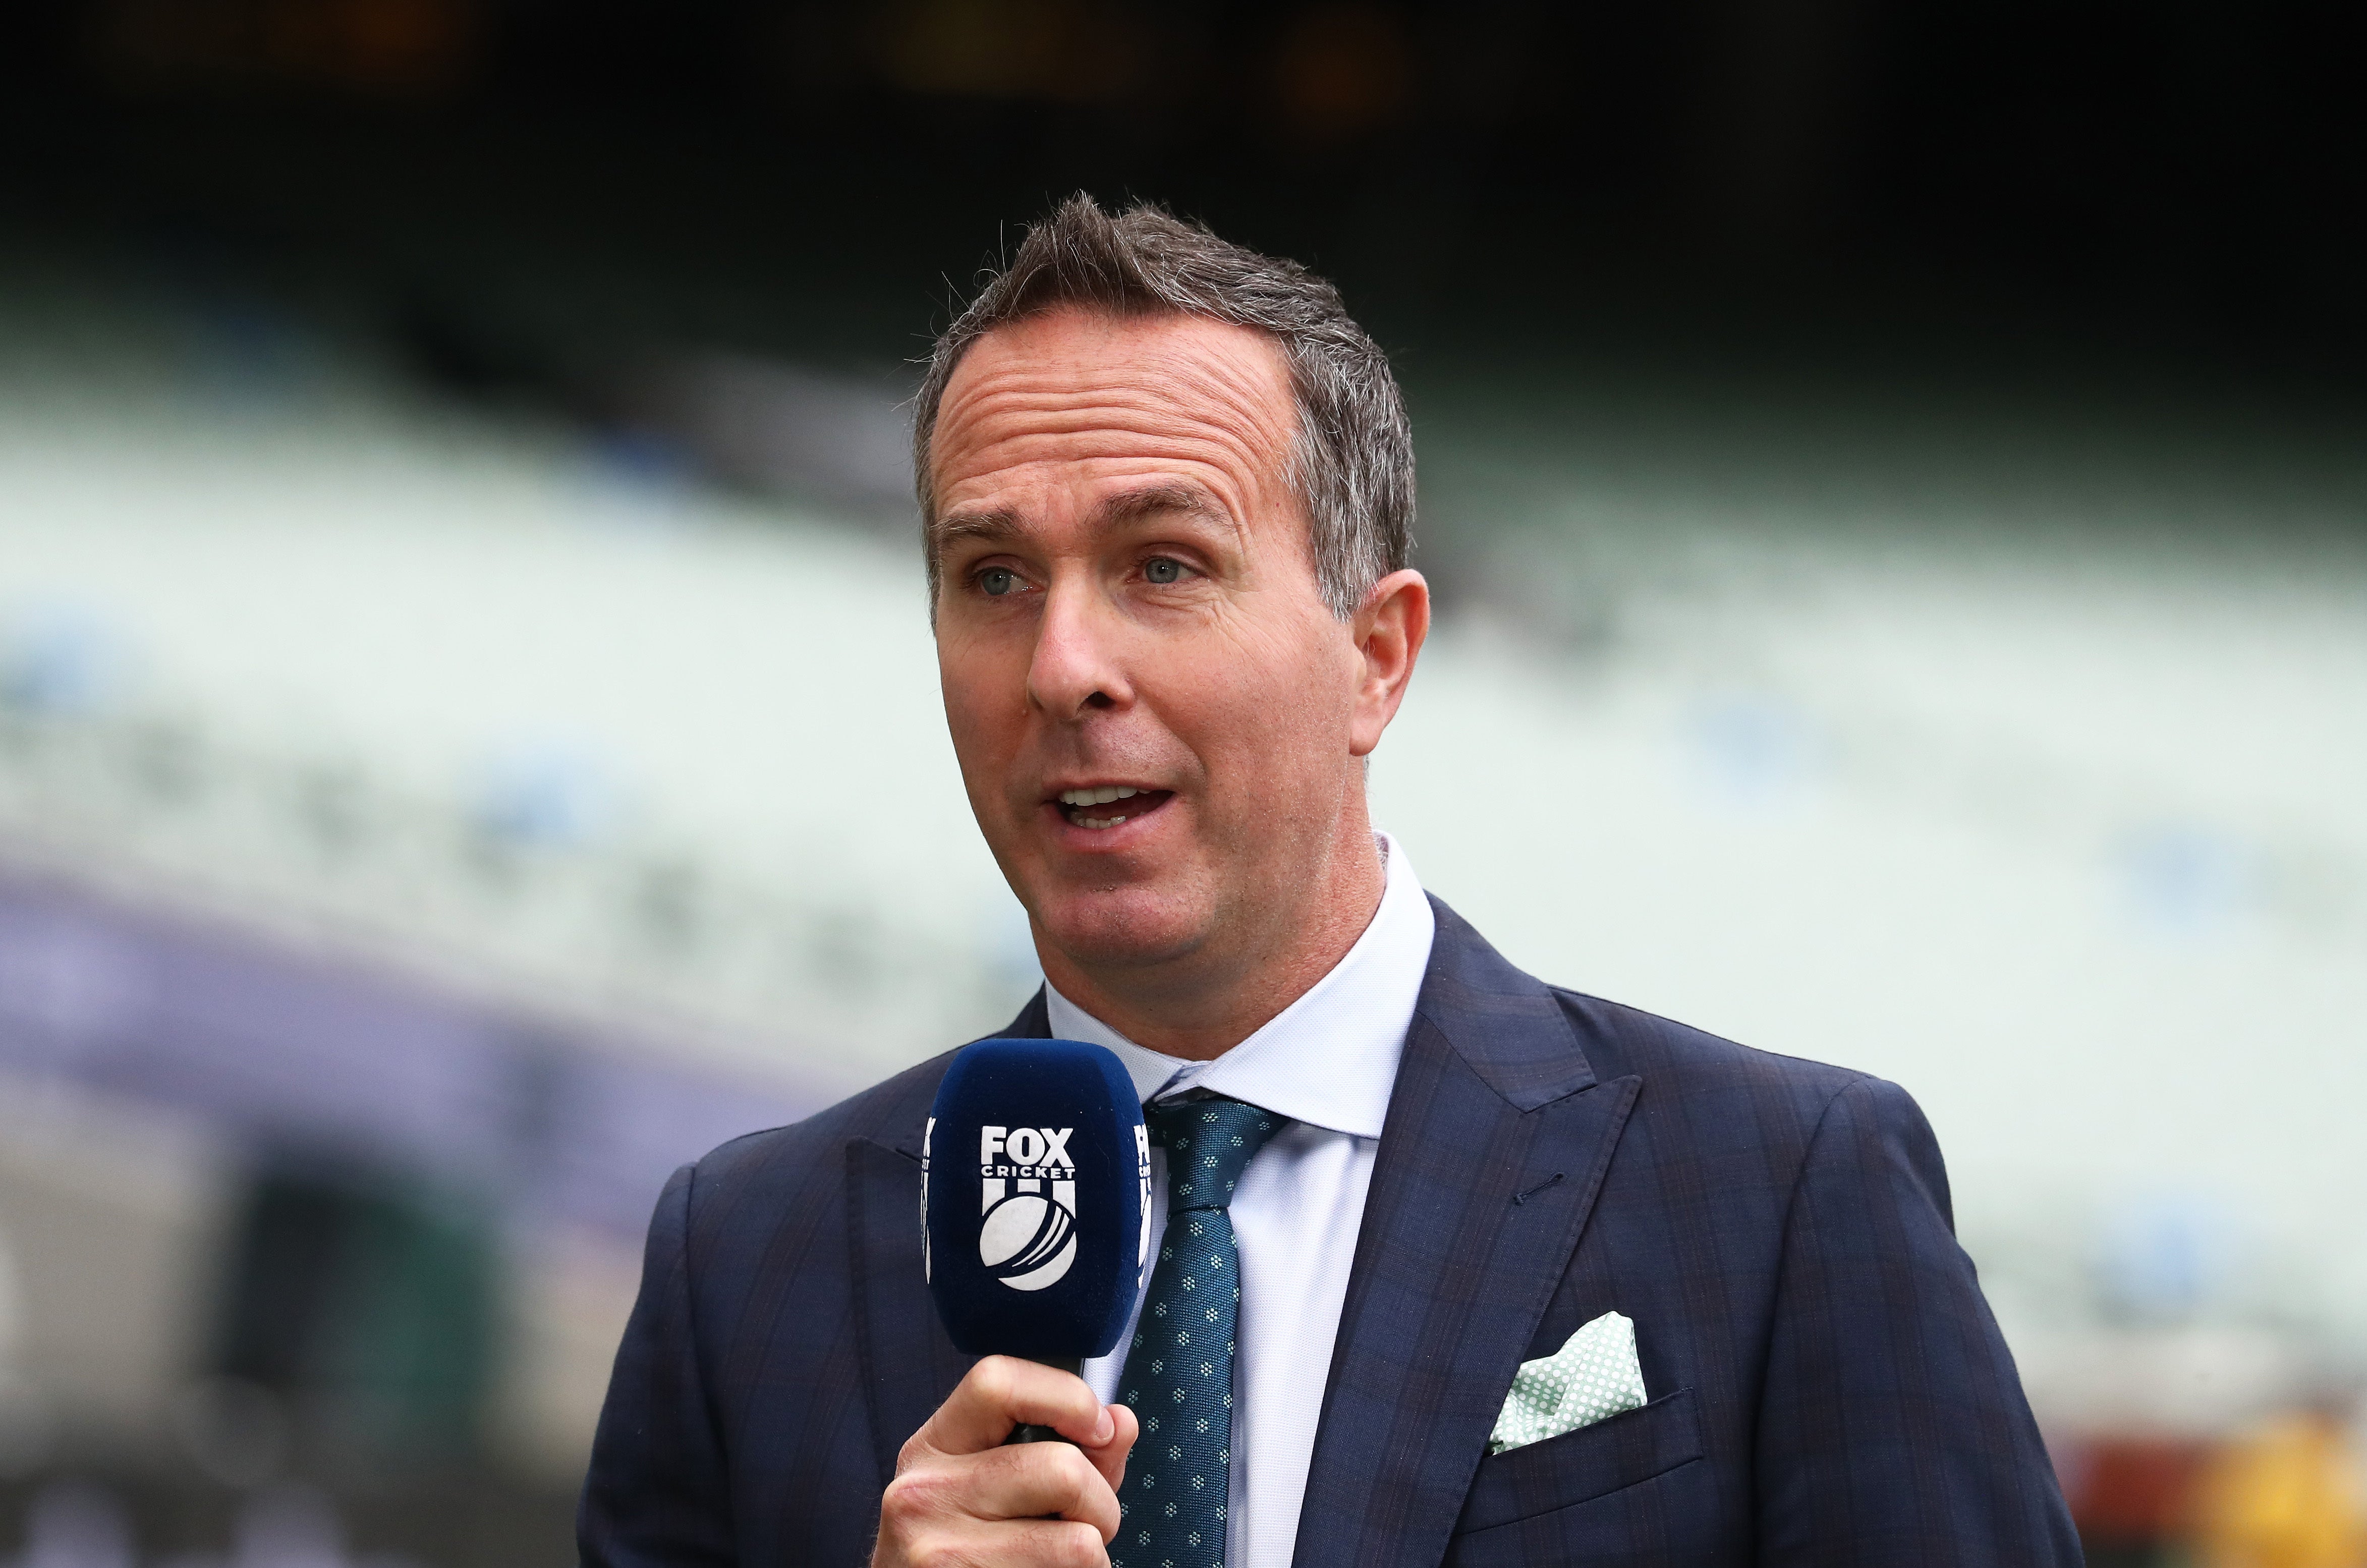 Michael Vaughan has taken part in a 20-hour diversity and inclusion course since the Yorkshire scandal